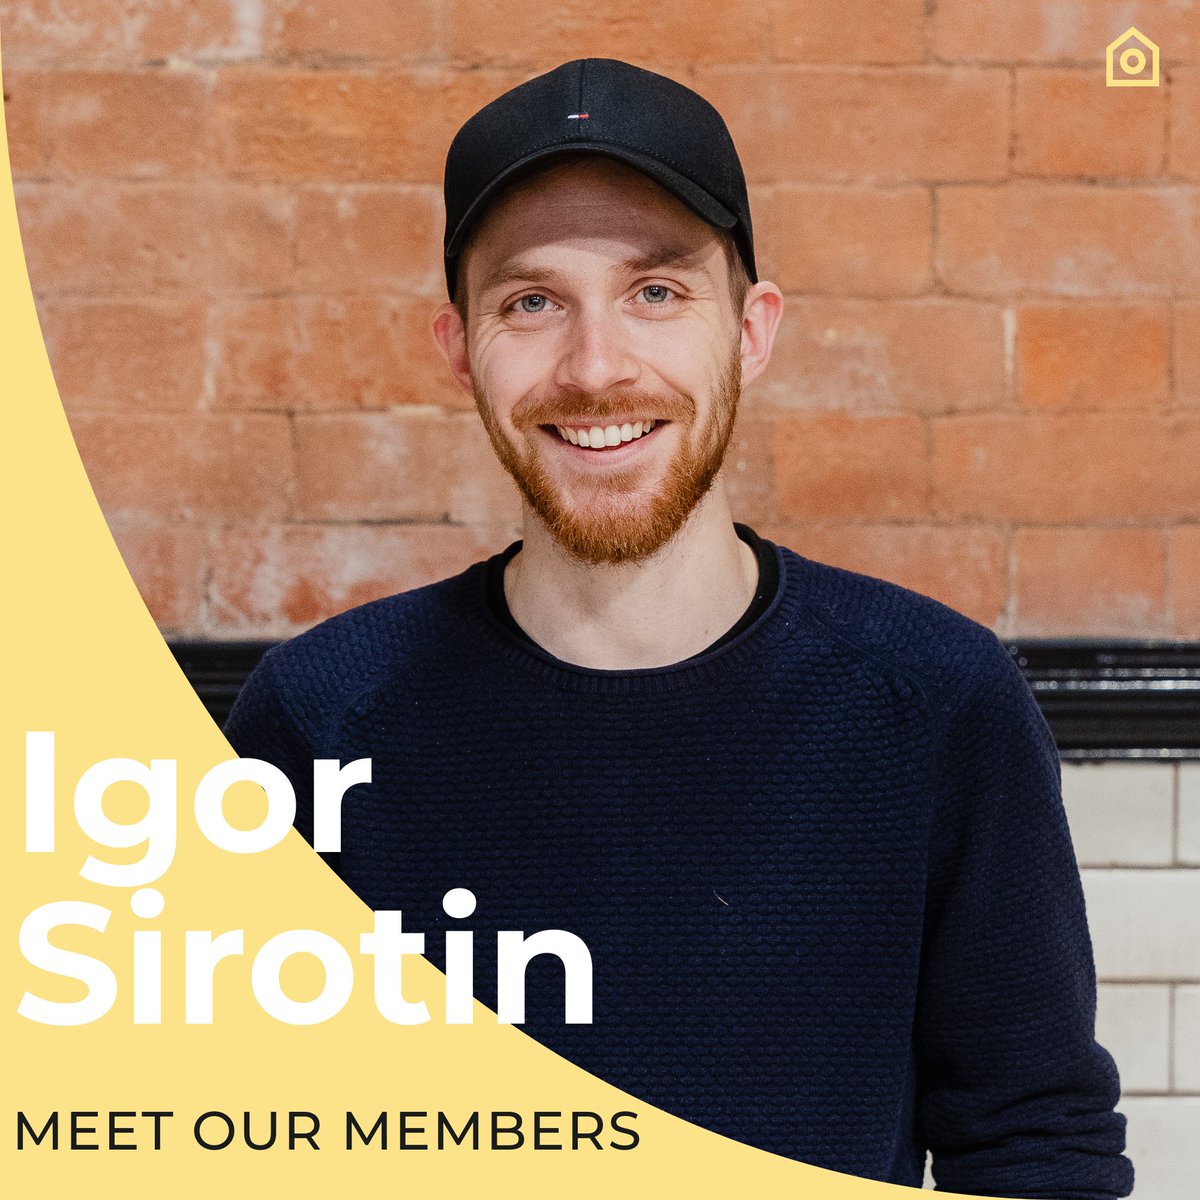 Our latest Meet Our Members, Matthew sits down with Igor to talk about: - Building radios with his grandfather - How he ended up in Northern Ireland - Why he doesn't like working from home and the thing that's surprised him the most about Northern Ireland youtu.be/GDQ_OL7KCZc?si…